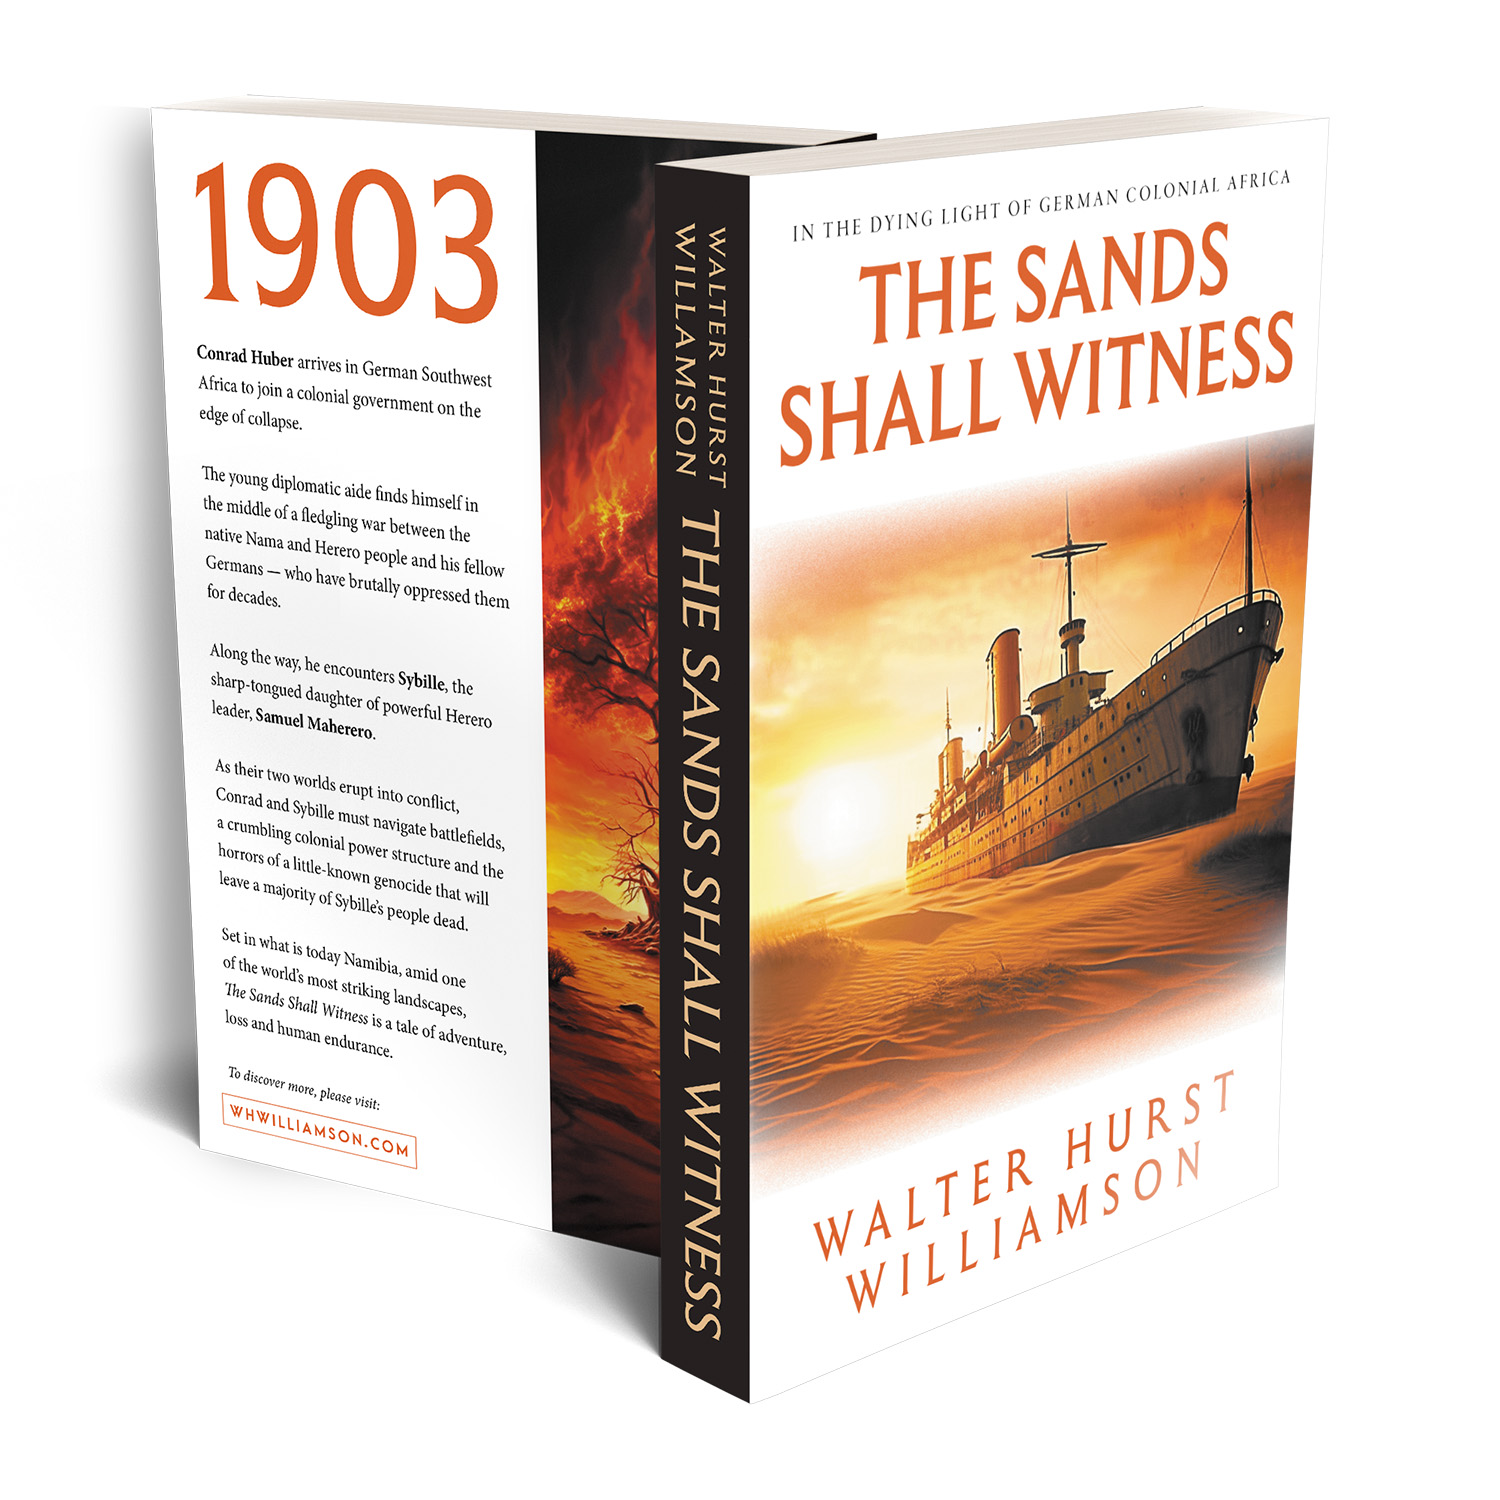 'The Sands Shall Witness' is an epic historical fiction novel, set in the darkness of German Colonial rule of early 20th Century Africa. The author is Walter Hurst Williamson. The book cover, maps and interior formatting are designed by Mark Thomas of coverness.com. To find out more about my book design services, please visit www.coverness.com